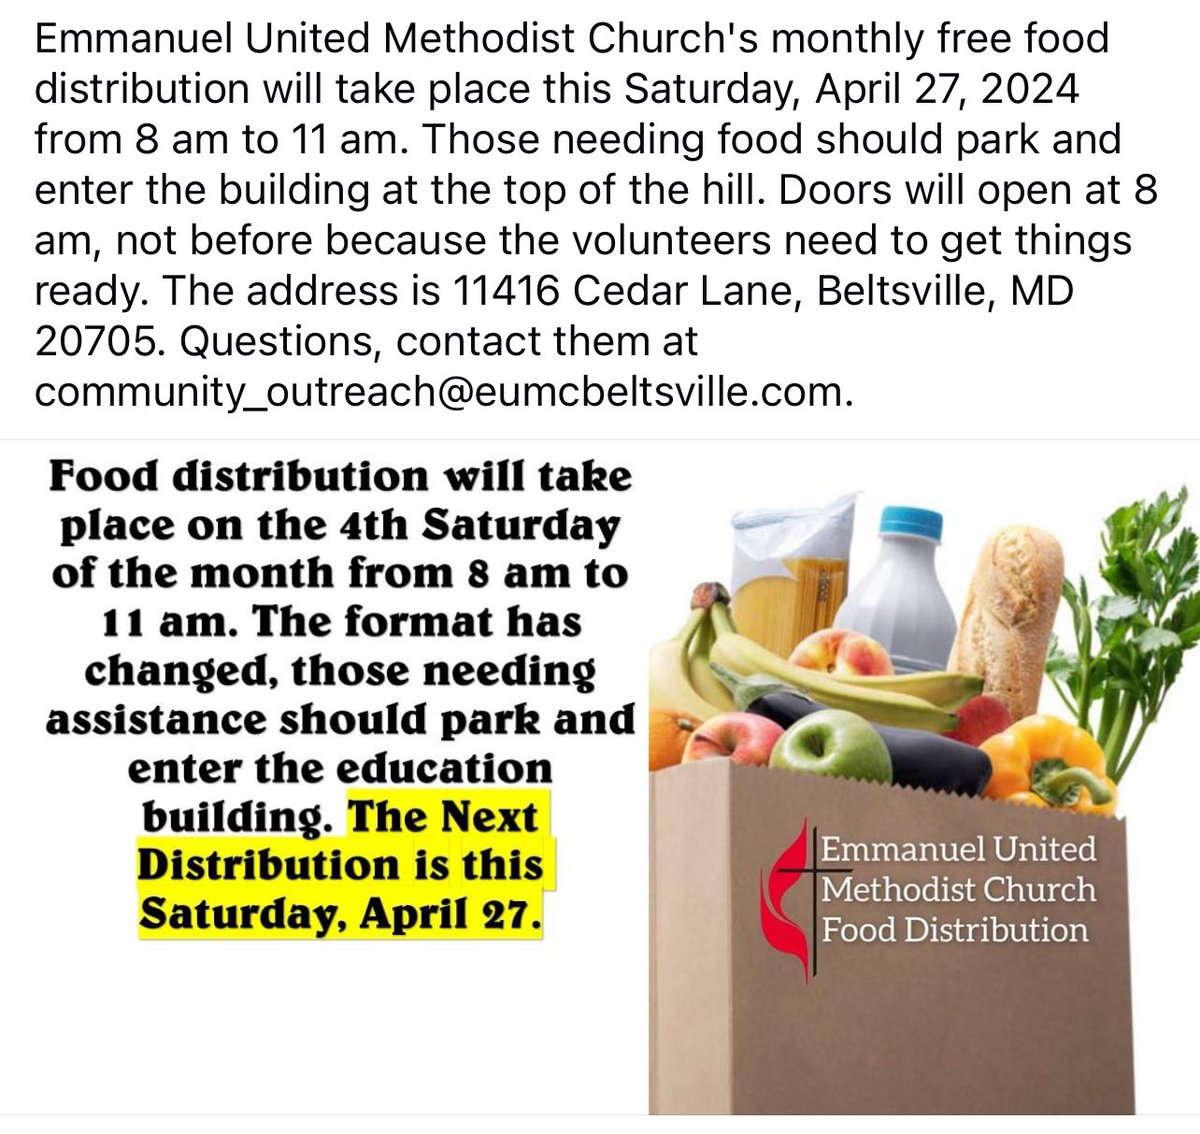 April 27, Beltsville, Food Distribution 
DMV Free Events is not associated with the events. Organizations can make changes at their discretion. Contact the event organizer with any questions.
#DMVFreeEvents